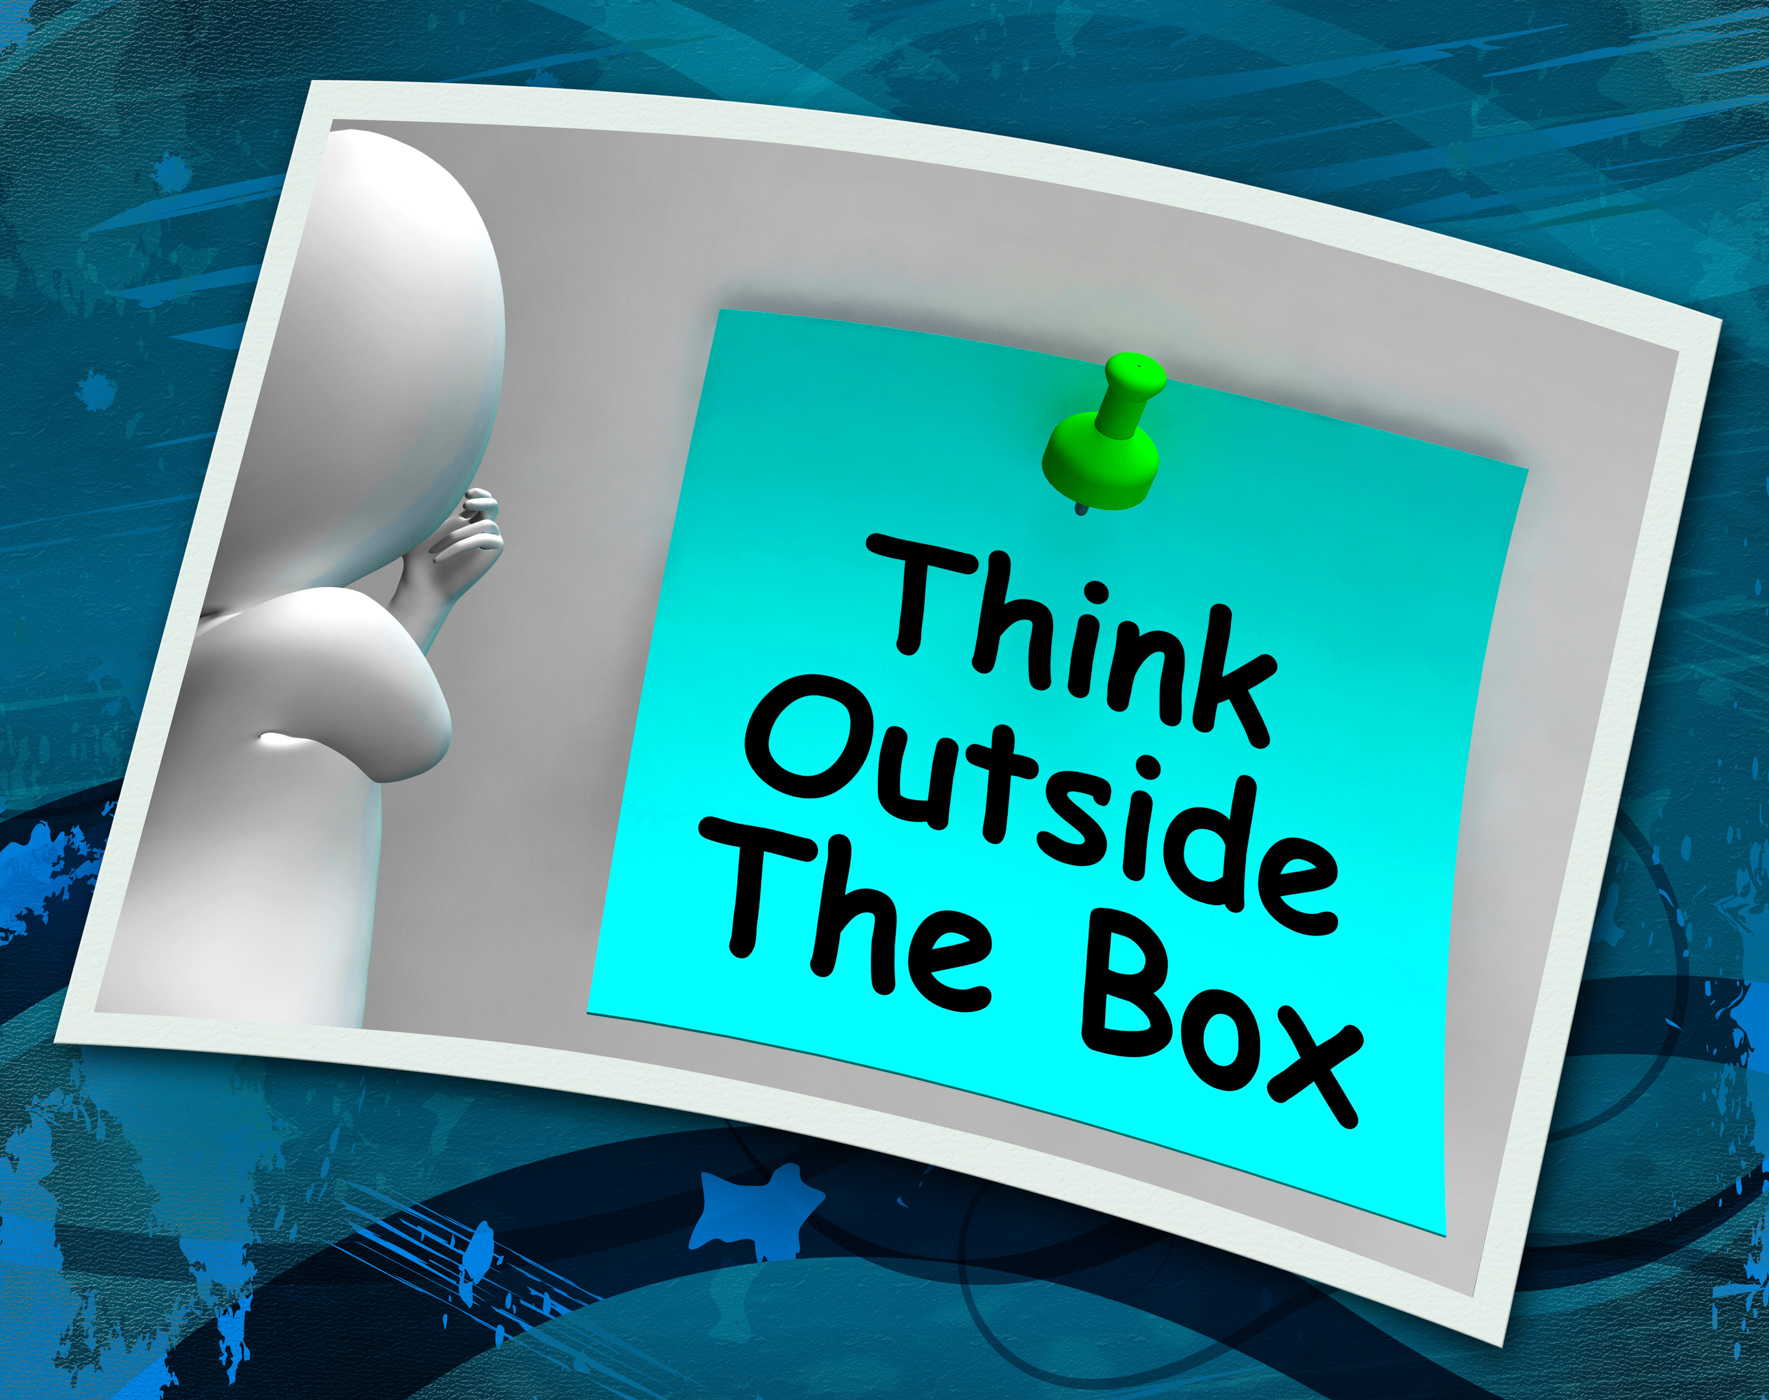 Think outside the box photo means different unconventional thinking